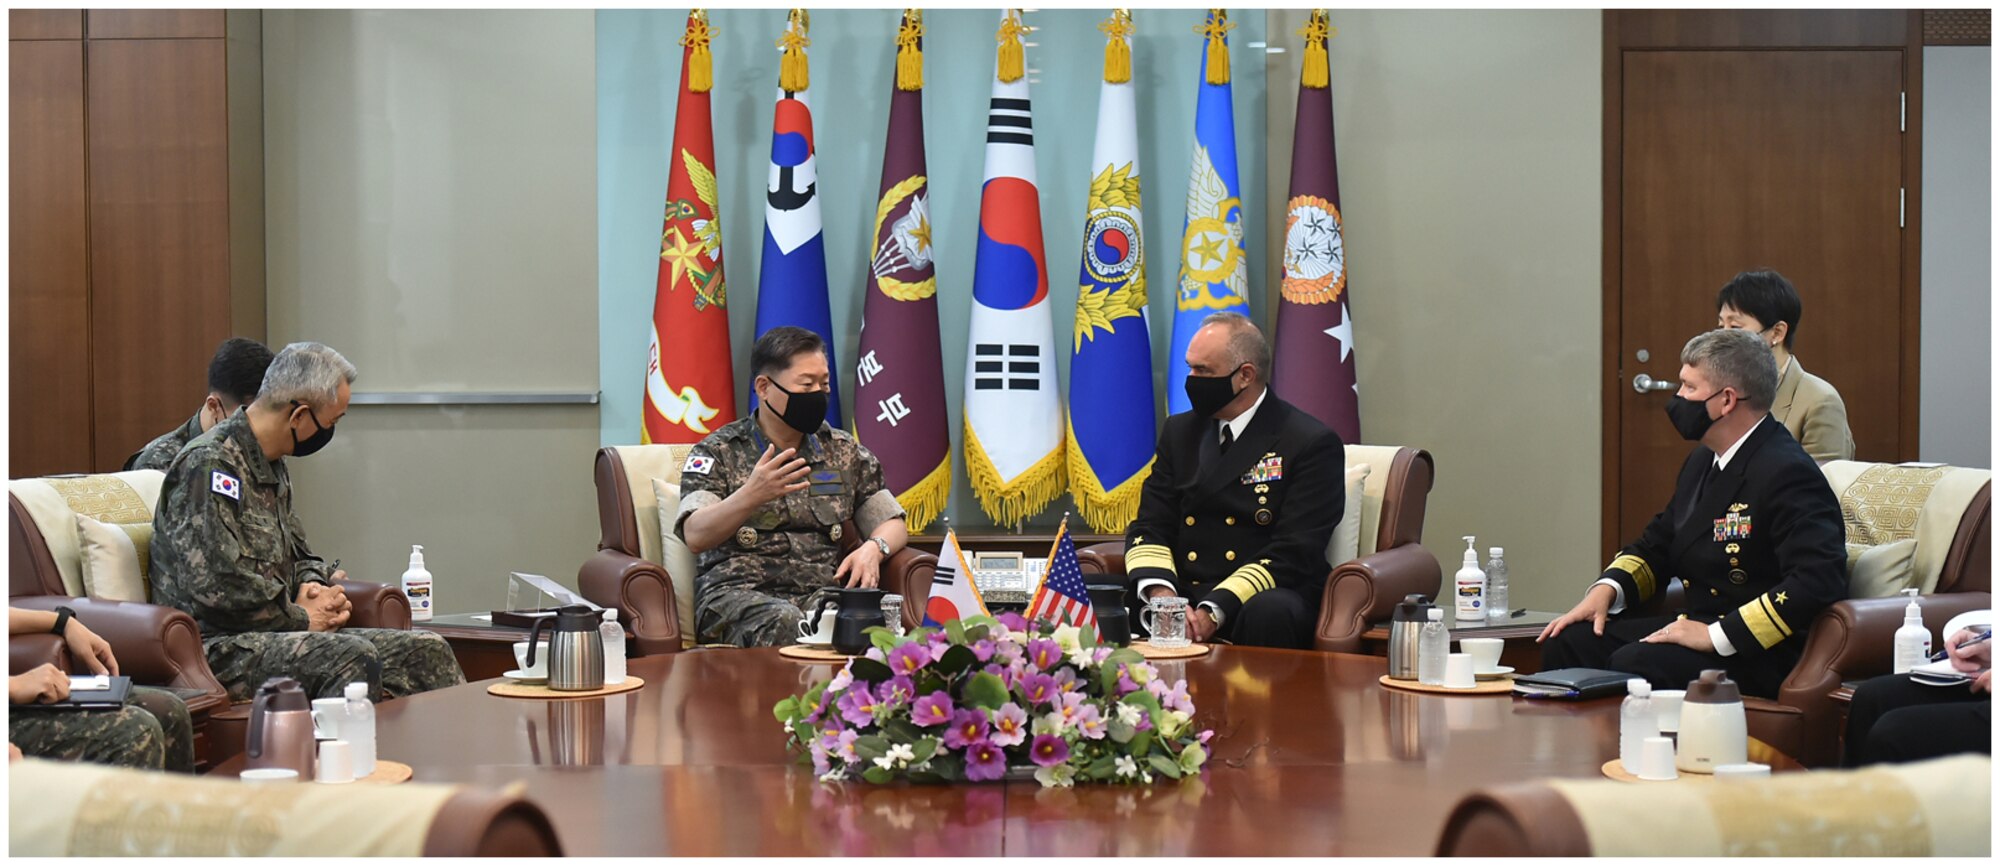 Adm. Richard meets with ROK Chairman of Joint Chiefs of Staff, Minister of Defense, and other ROK Commanders. Through the ironclad alliance with the ROK, the parties discussed ways to enhance the already strong deterrence posture and support ROK allies on the Korean Peninsula.